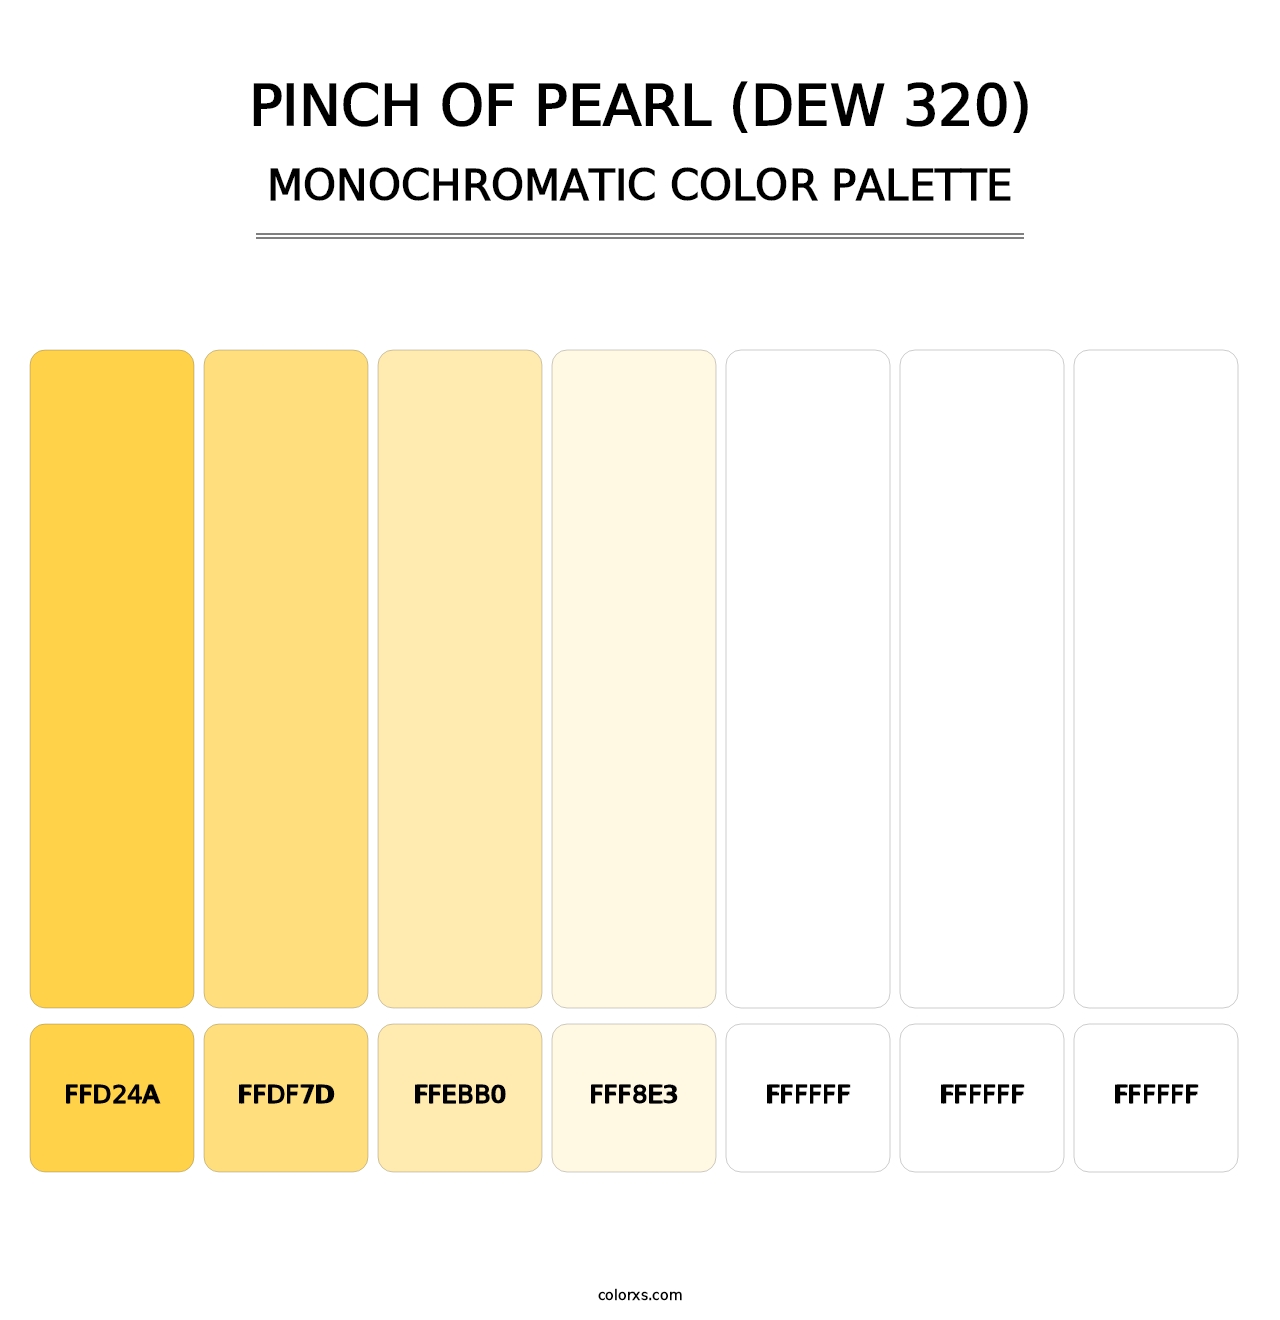 Pinch of Pearl (DEW 320) - Monochromatic Color Palette